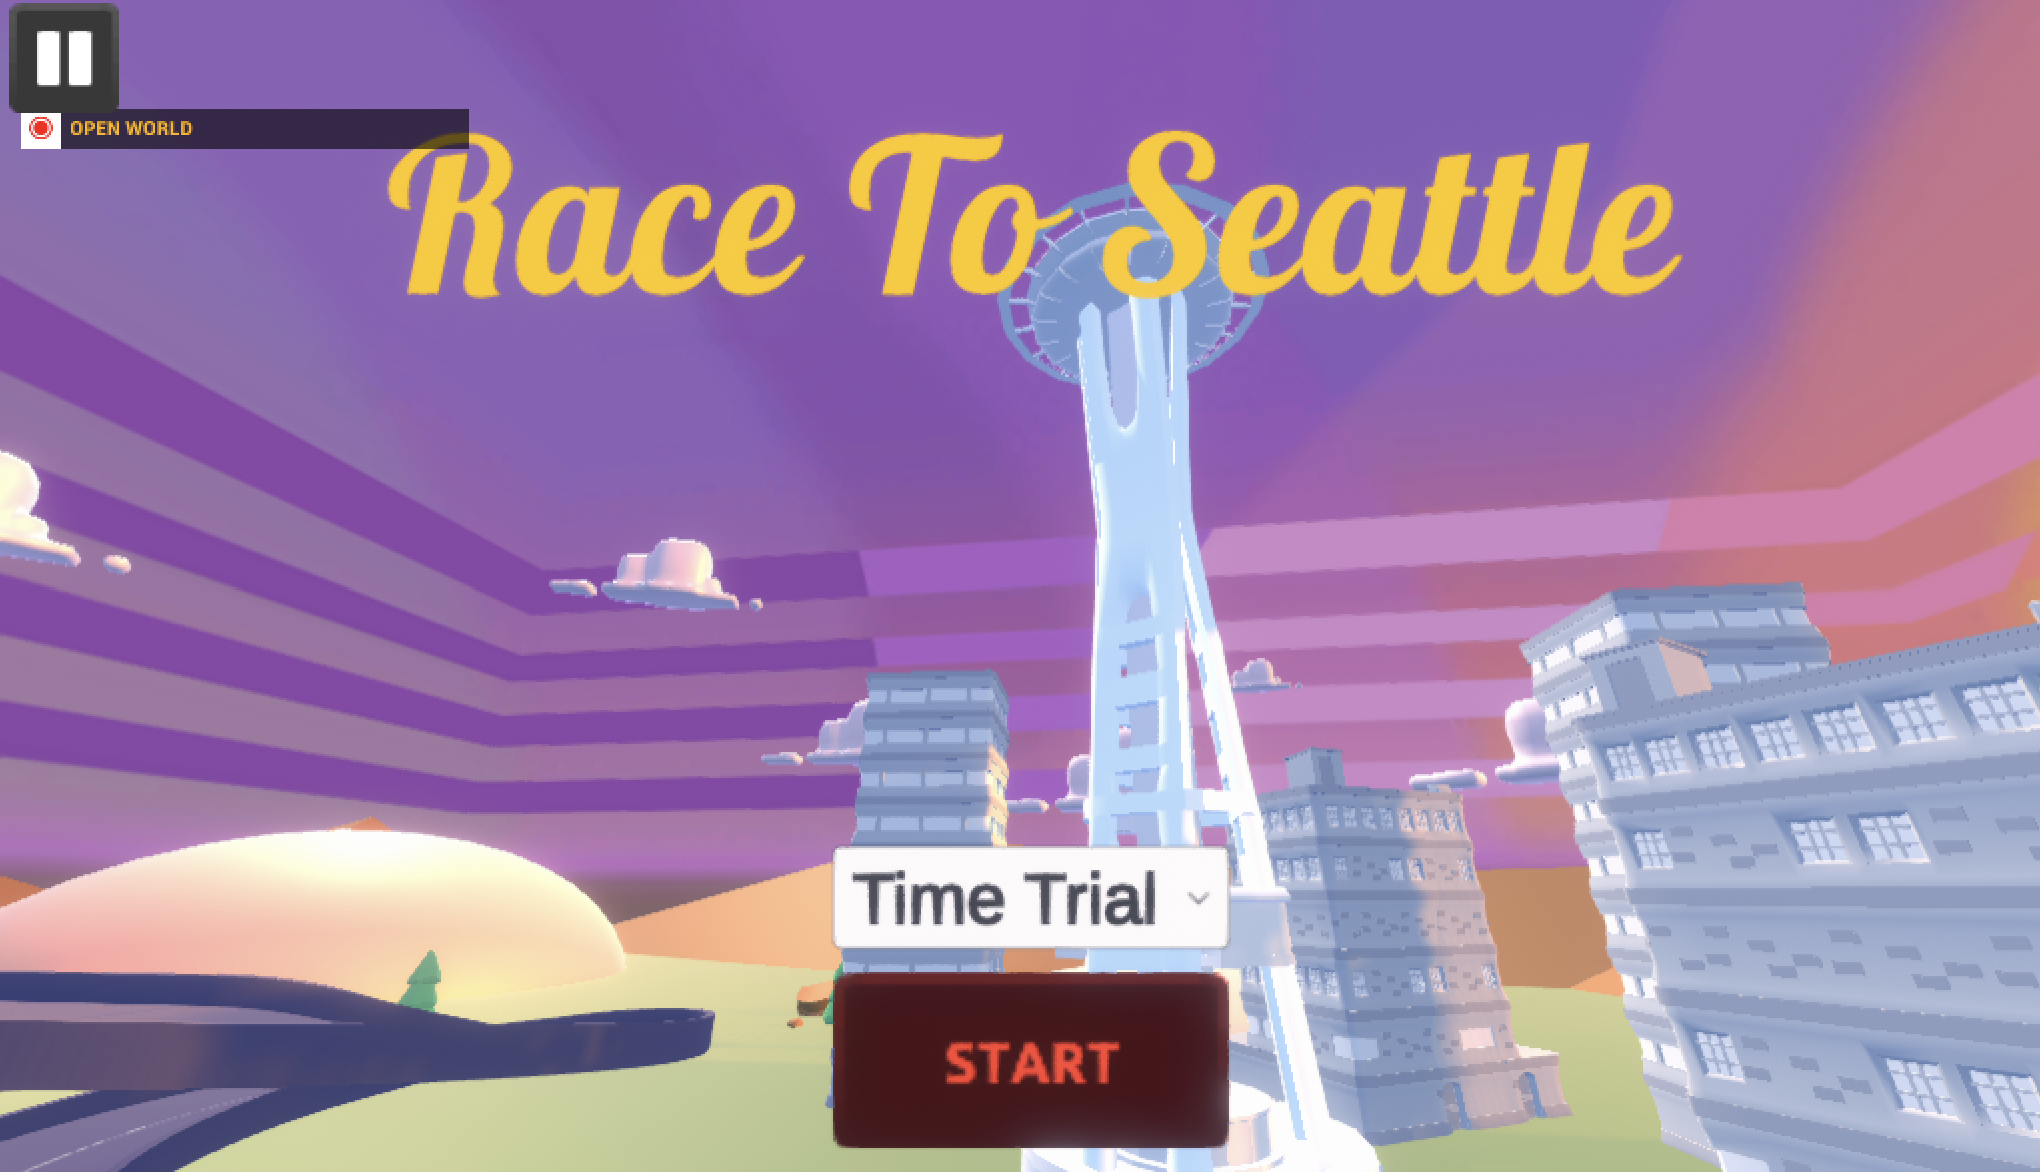 Race To Seattle